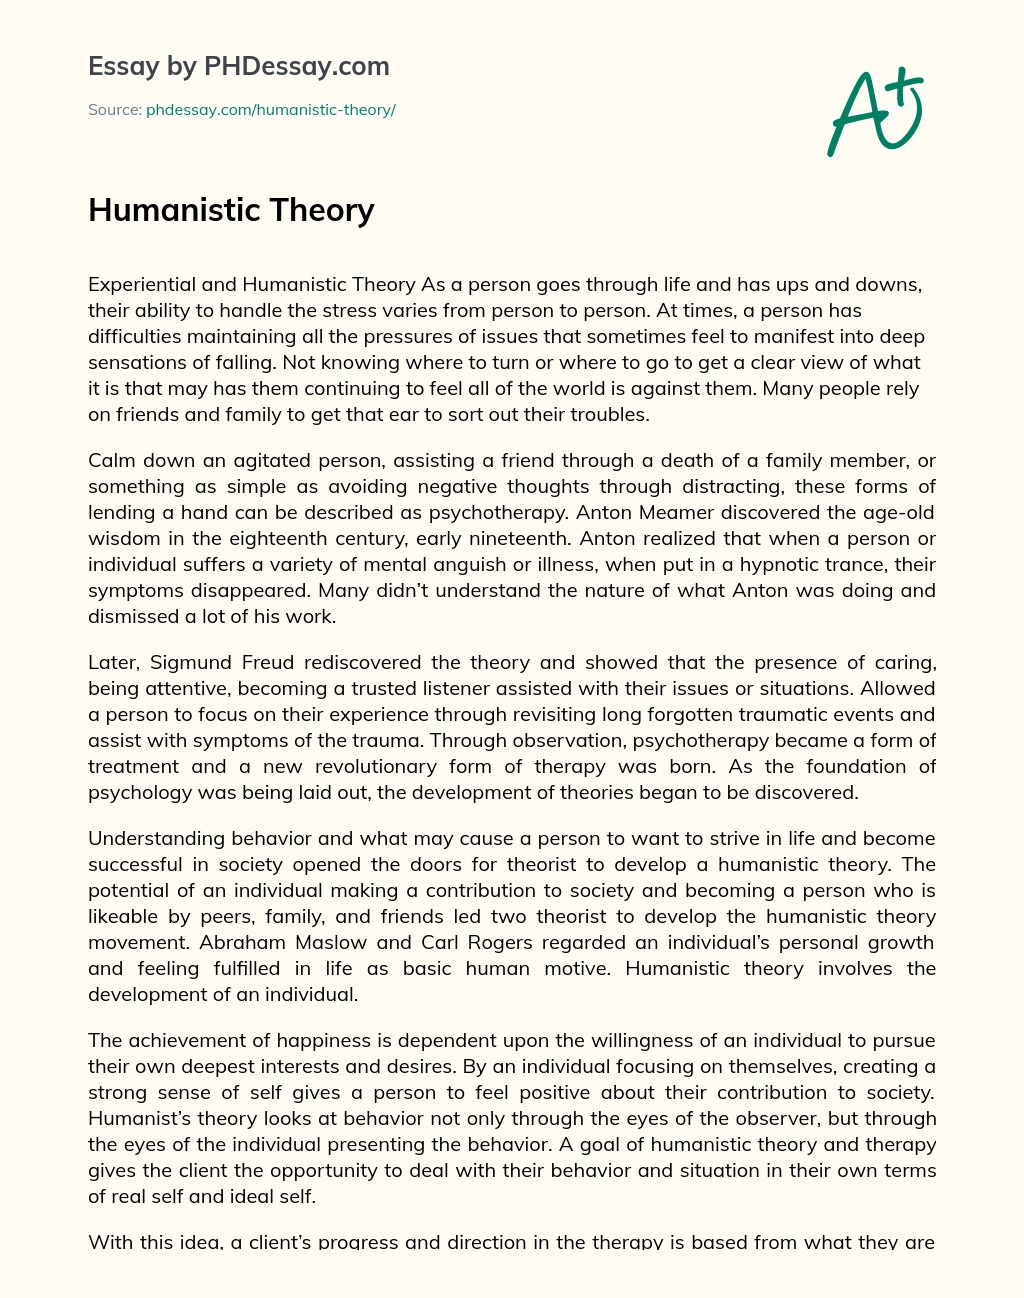 Humanistic Theory essay